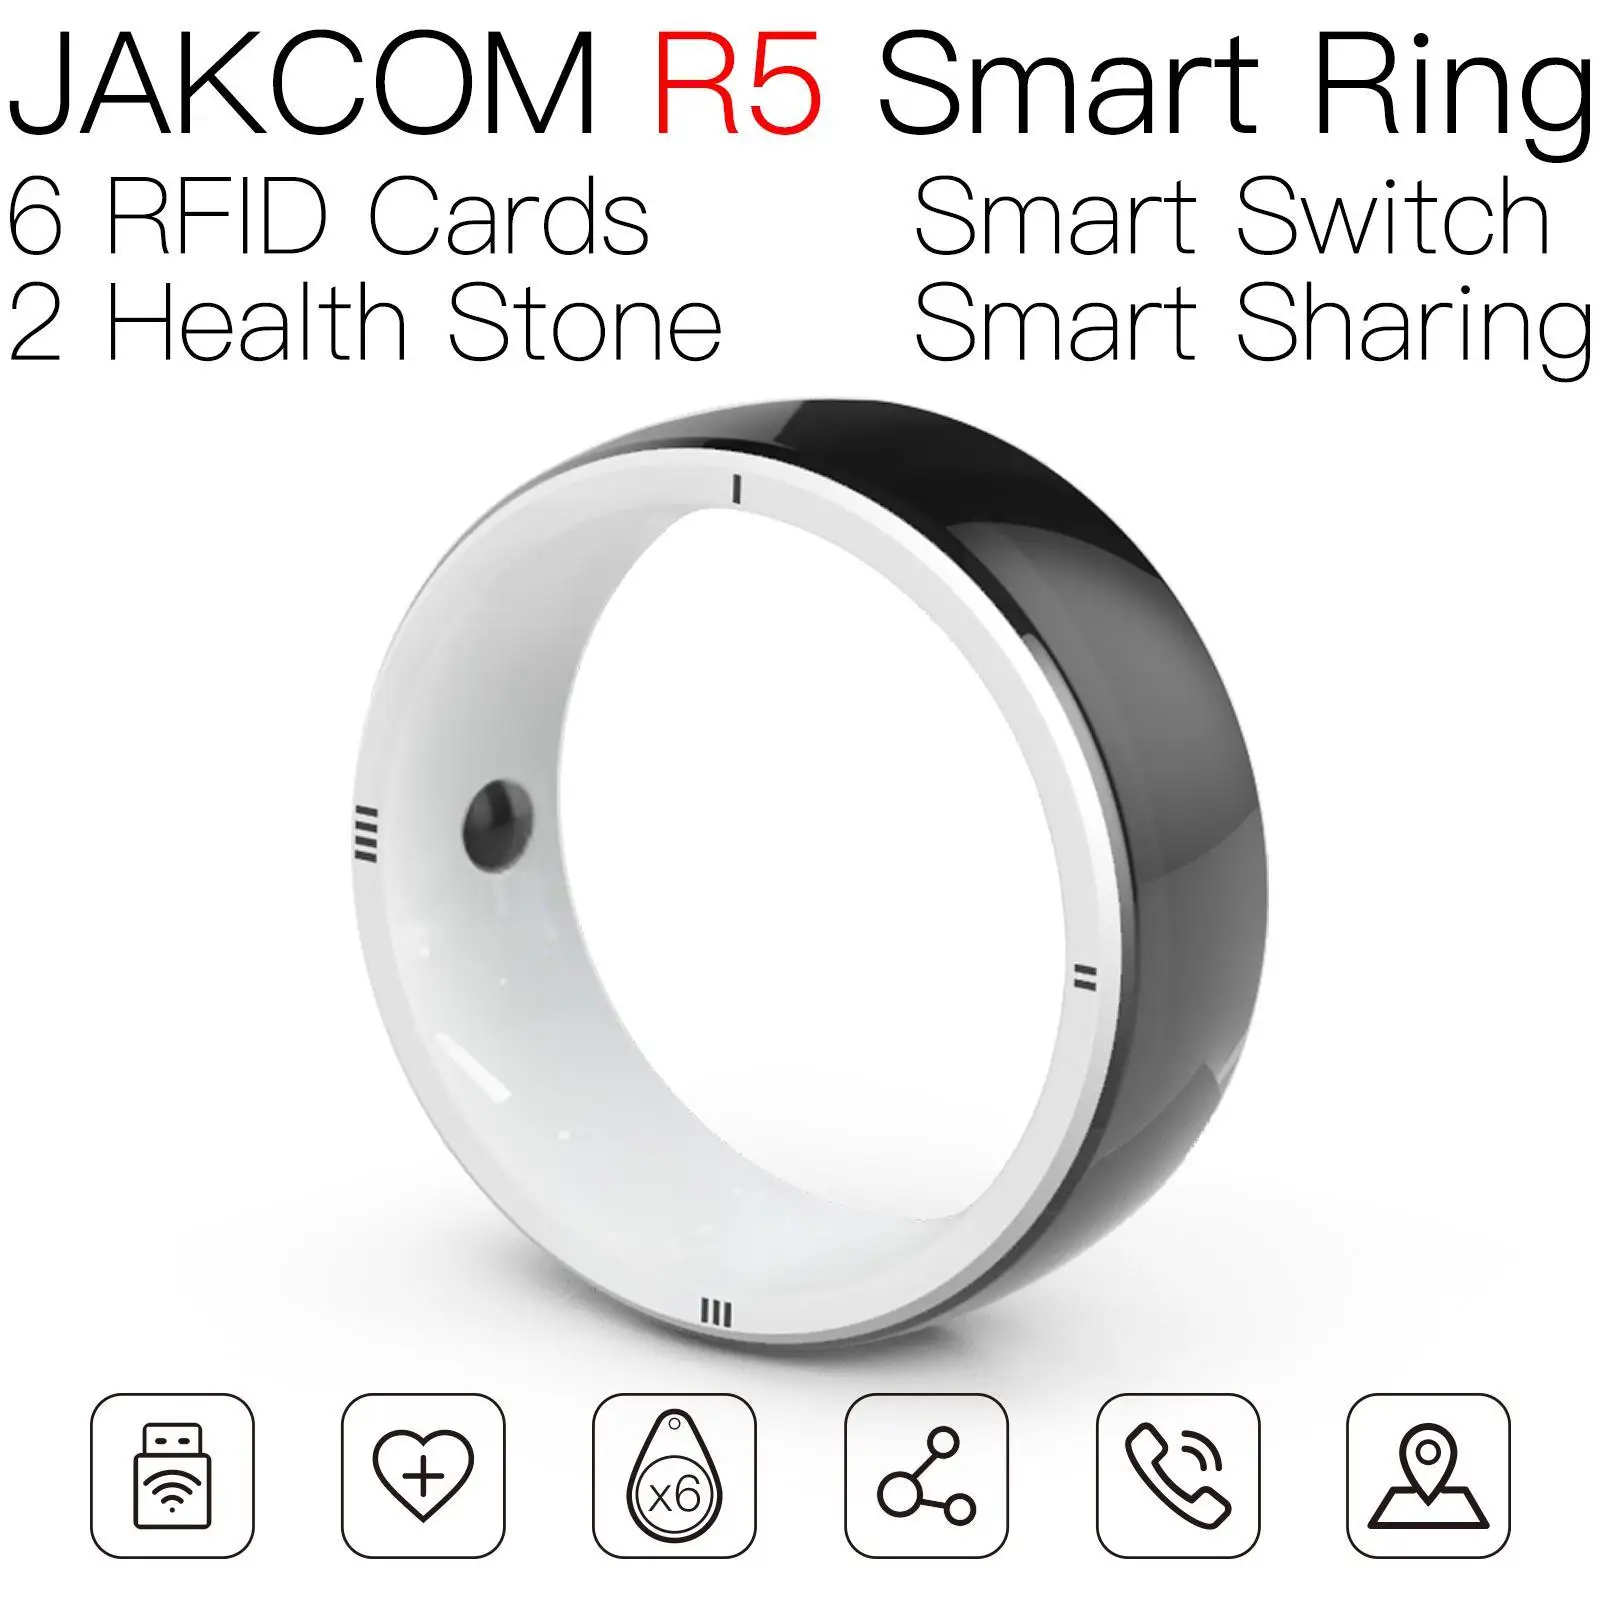 

JAKCOM R5 Smart Ring New arrival as watch color gadget electronique intelligent monst doll first order deals free